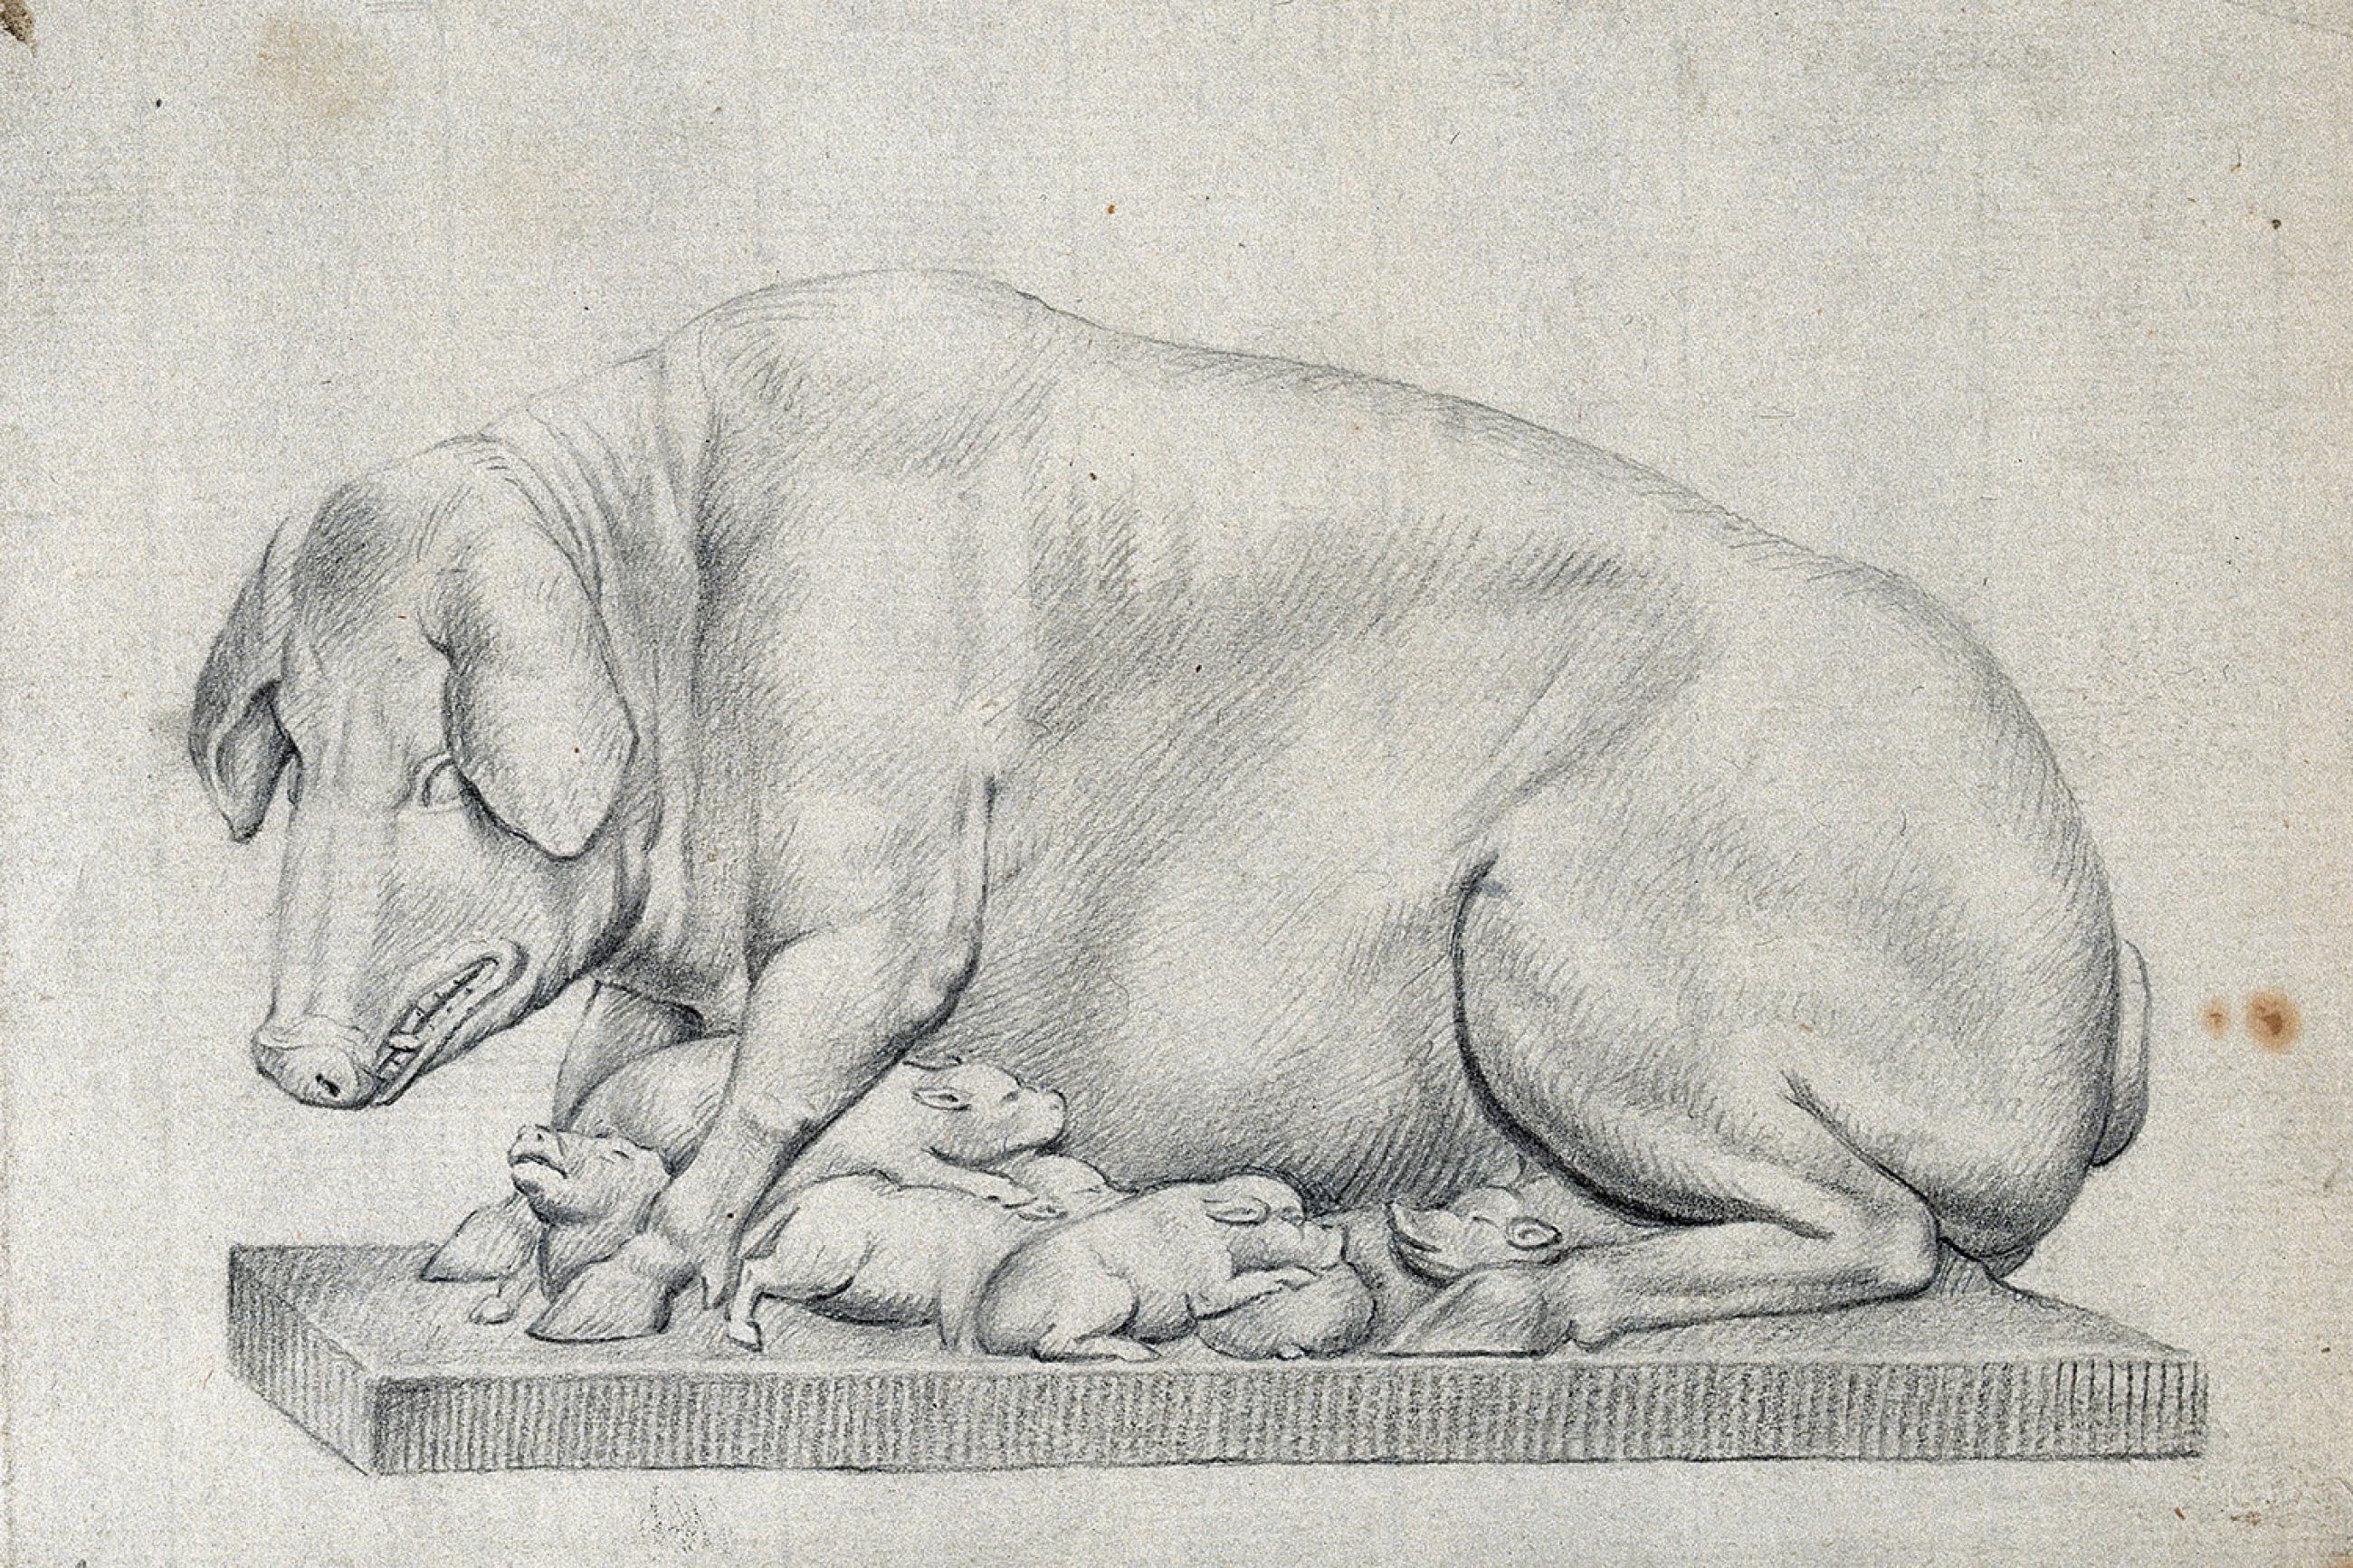 A statue of a hog with litter of suckling piglets. Pencil drawing by William Young Ottley (1771-1836). The picture is of a pencil drawing of a pig and her pups. CC BY 4.0 via Wellcome Collection